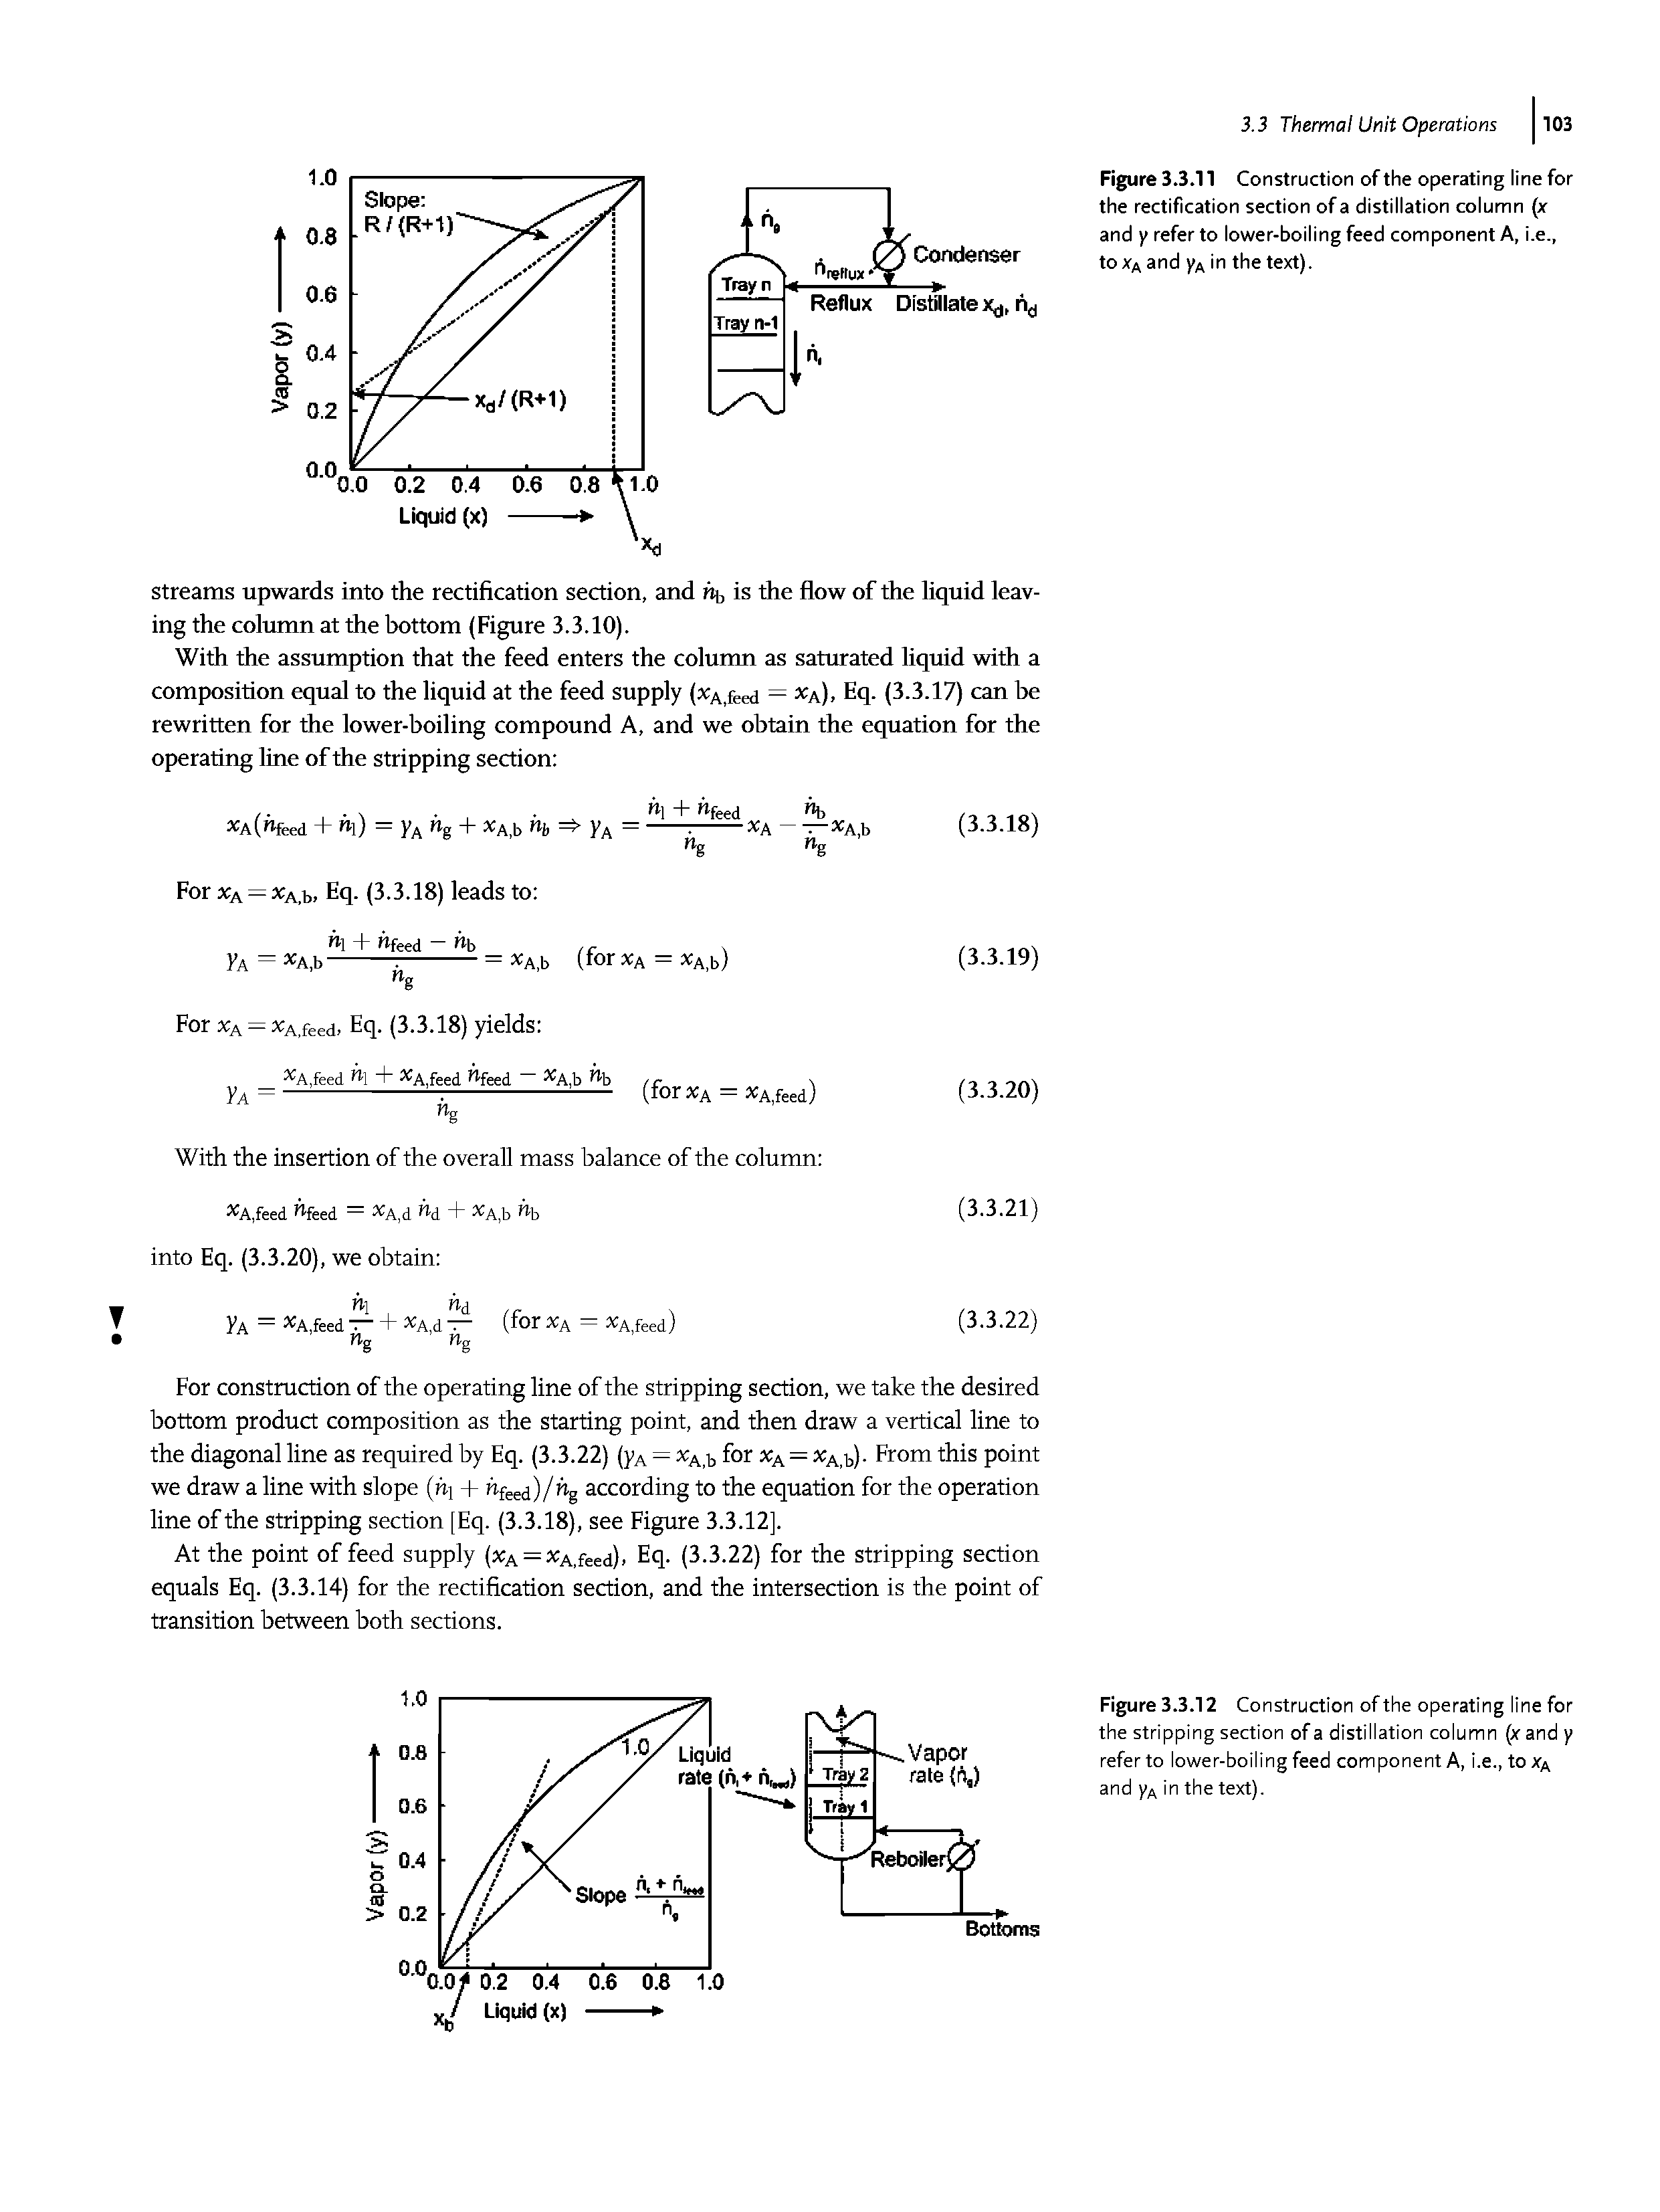 Figure 3.3.11 Construction of the operating line for the rectification section of a distillation column (x and y refer to lower-bolling feed component A, i.e., to xa and yA In the text).